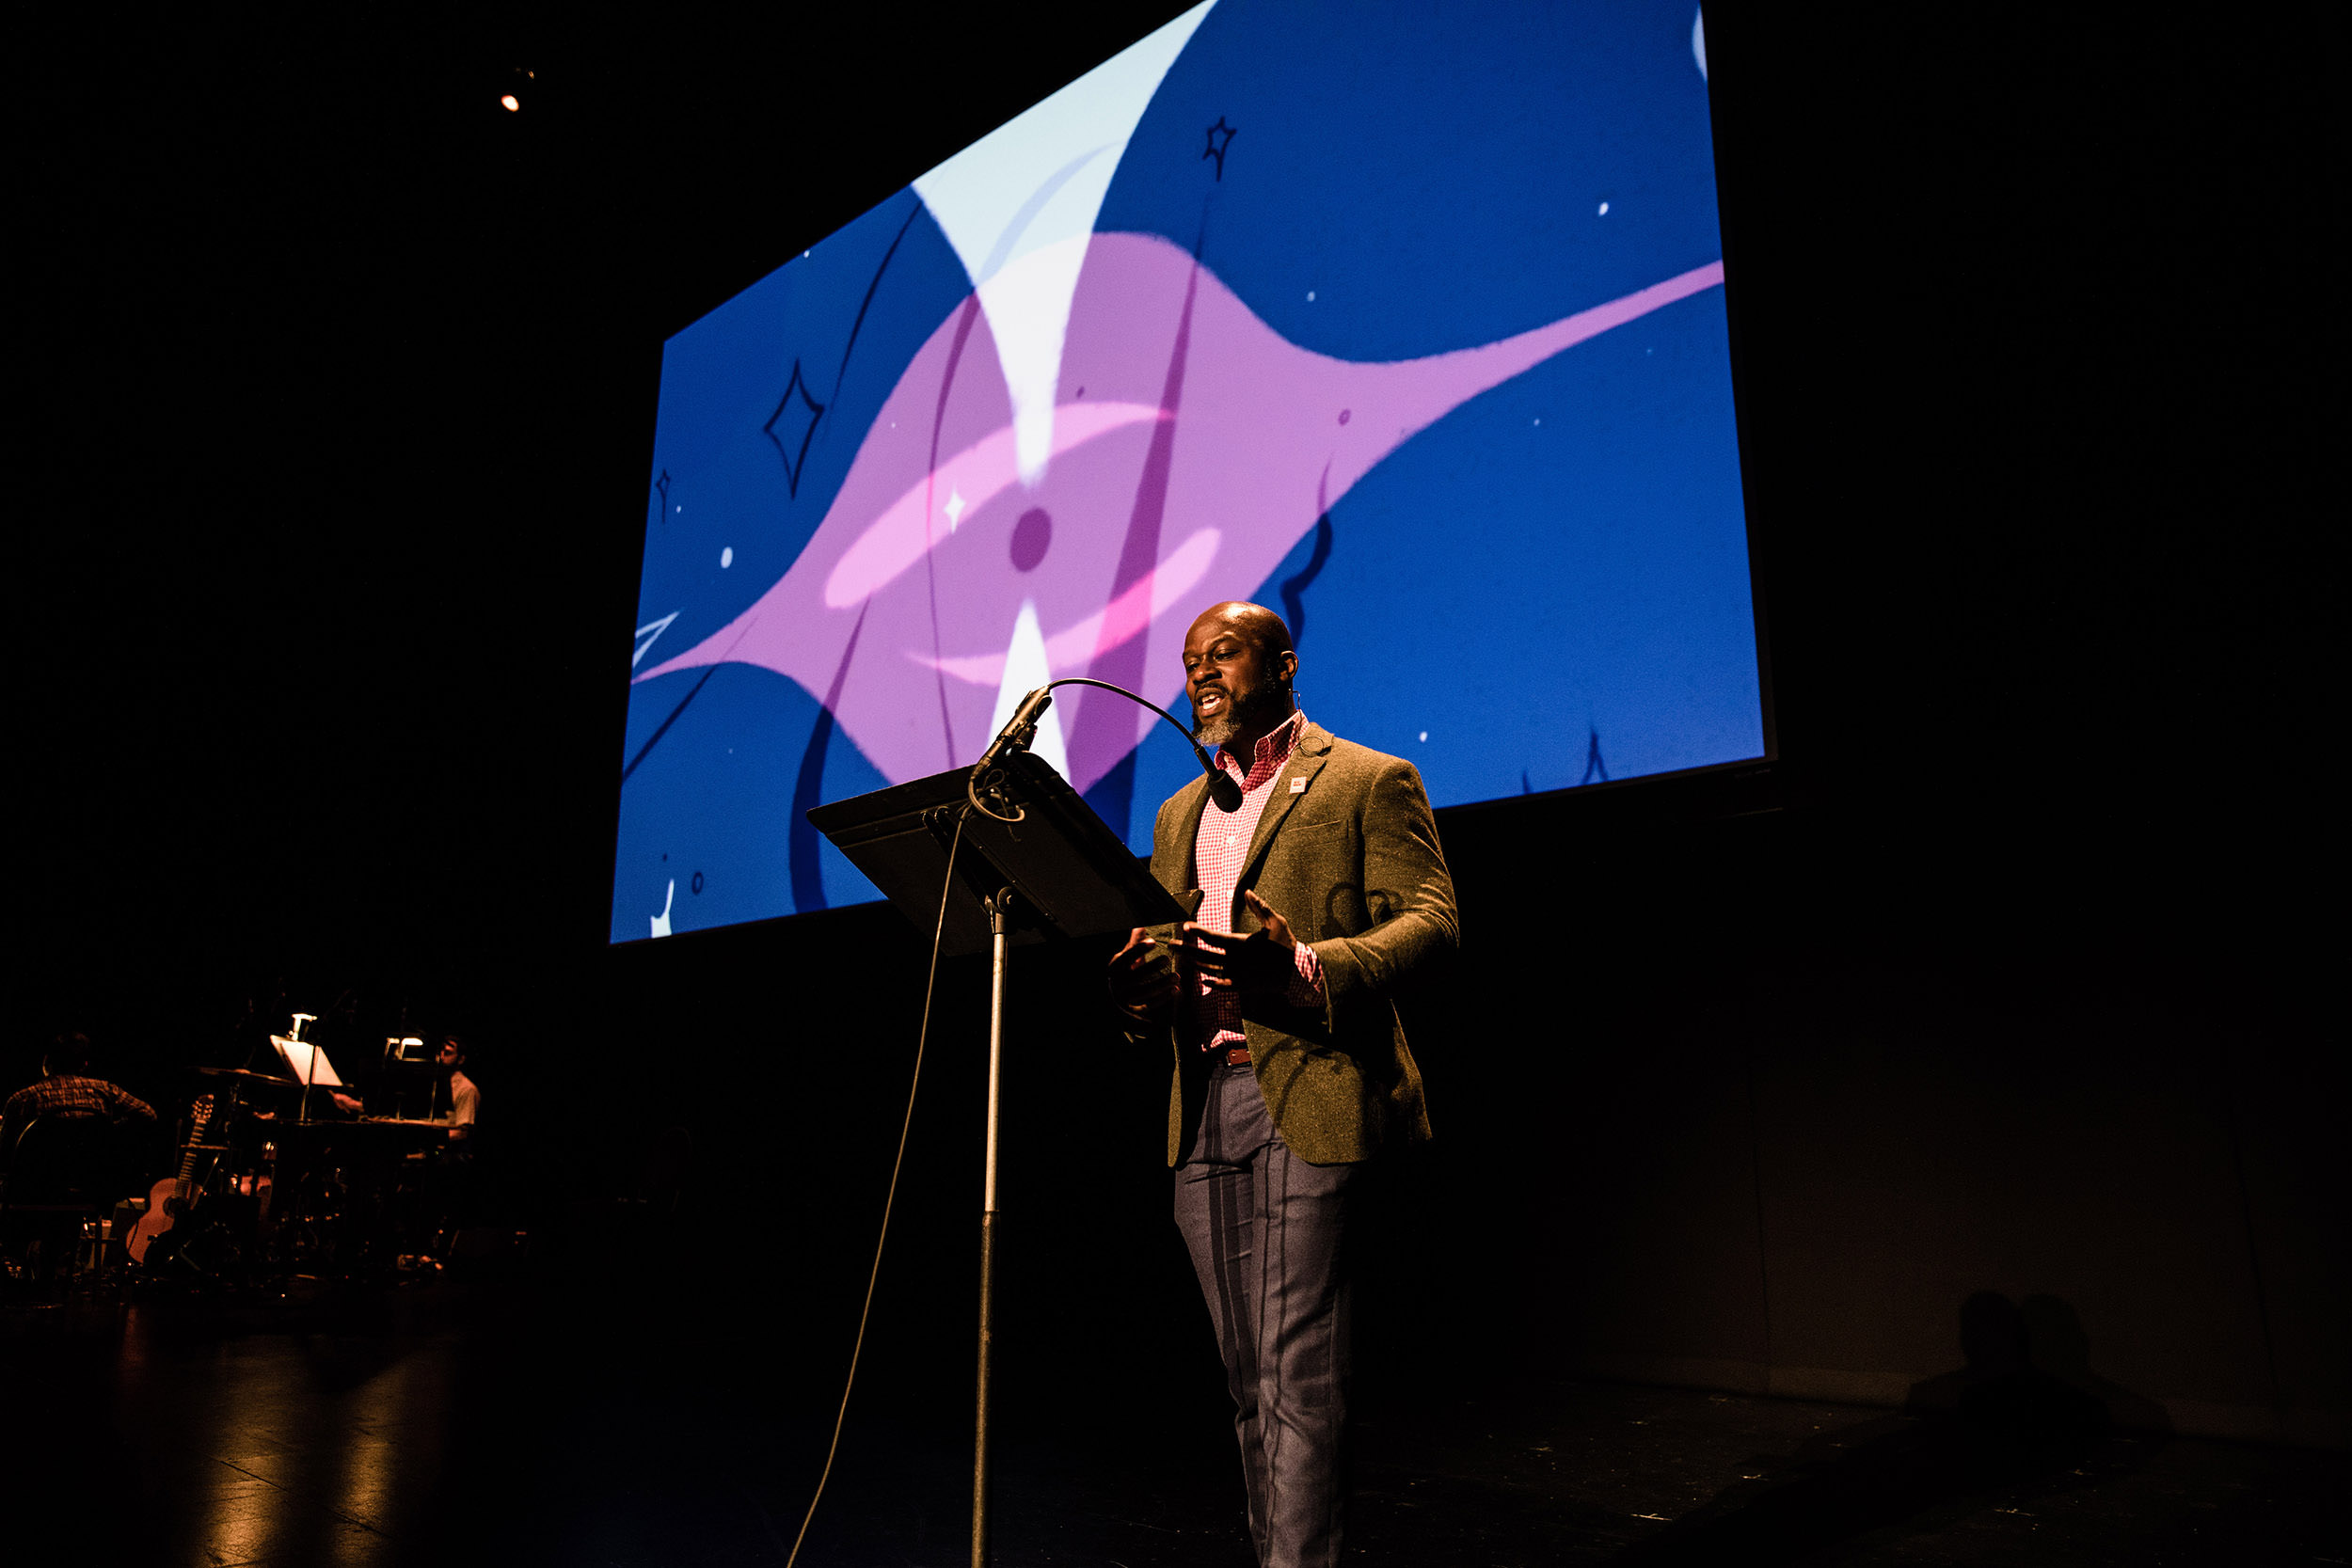 Marc Bamuthi Joseph performs on stage in front of a screen with blue and purple artwork.